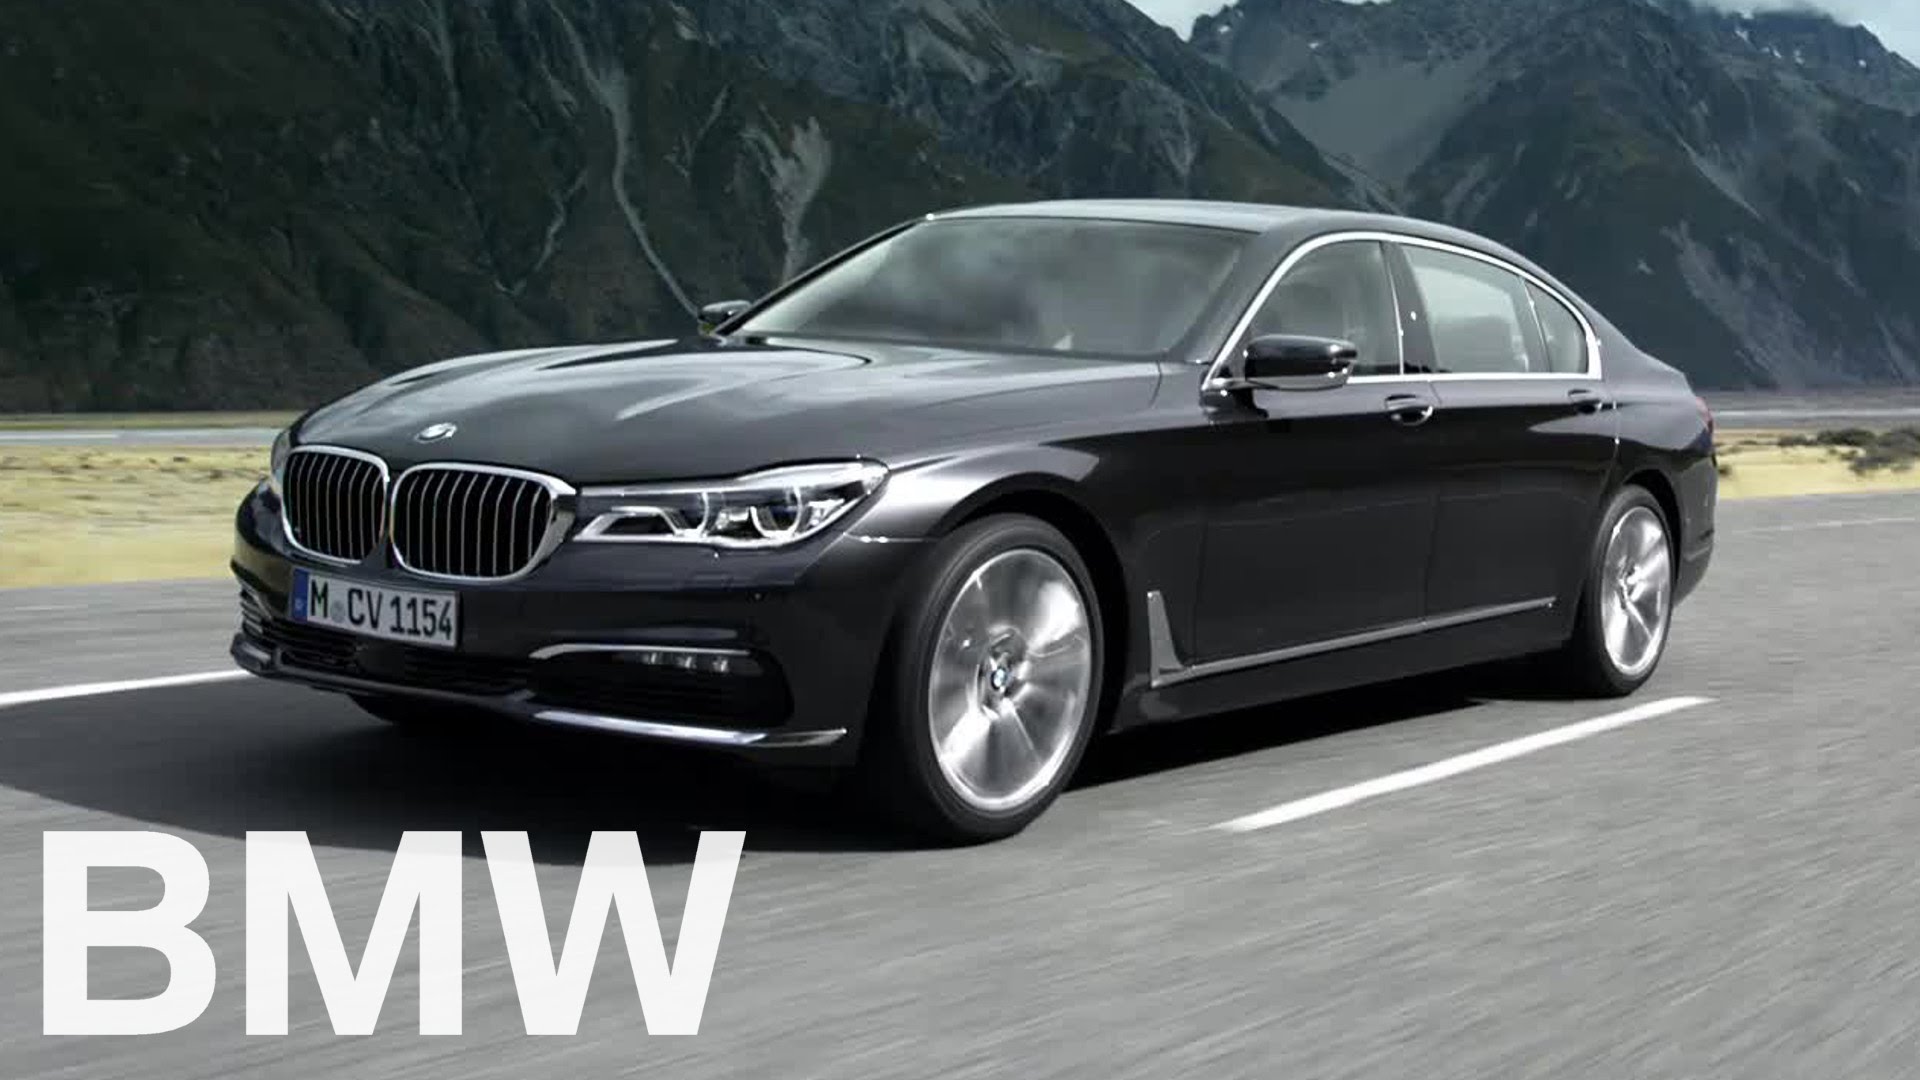 BMW 7 Series Pics, Vehicles Collection